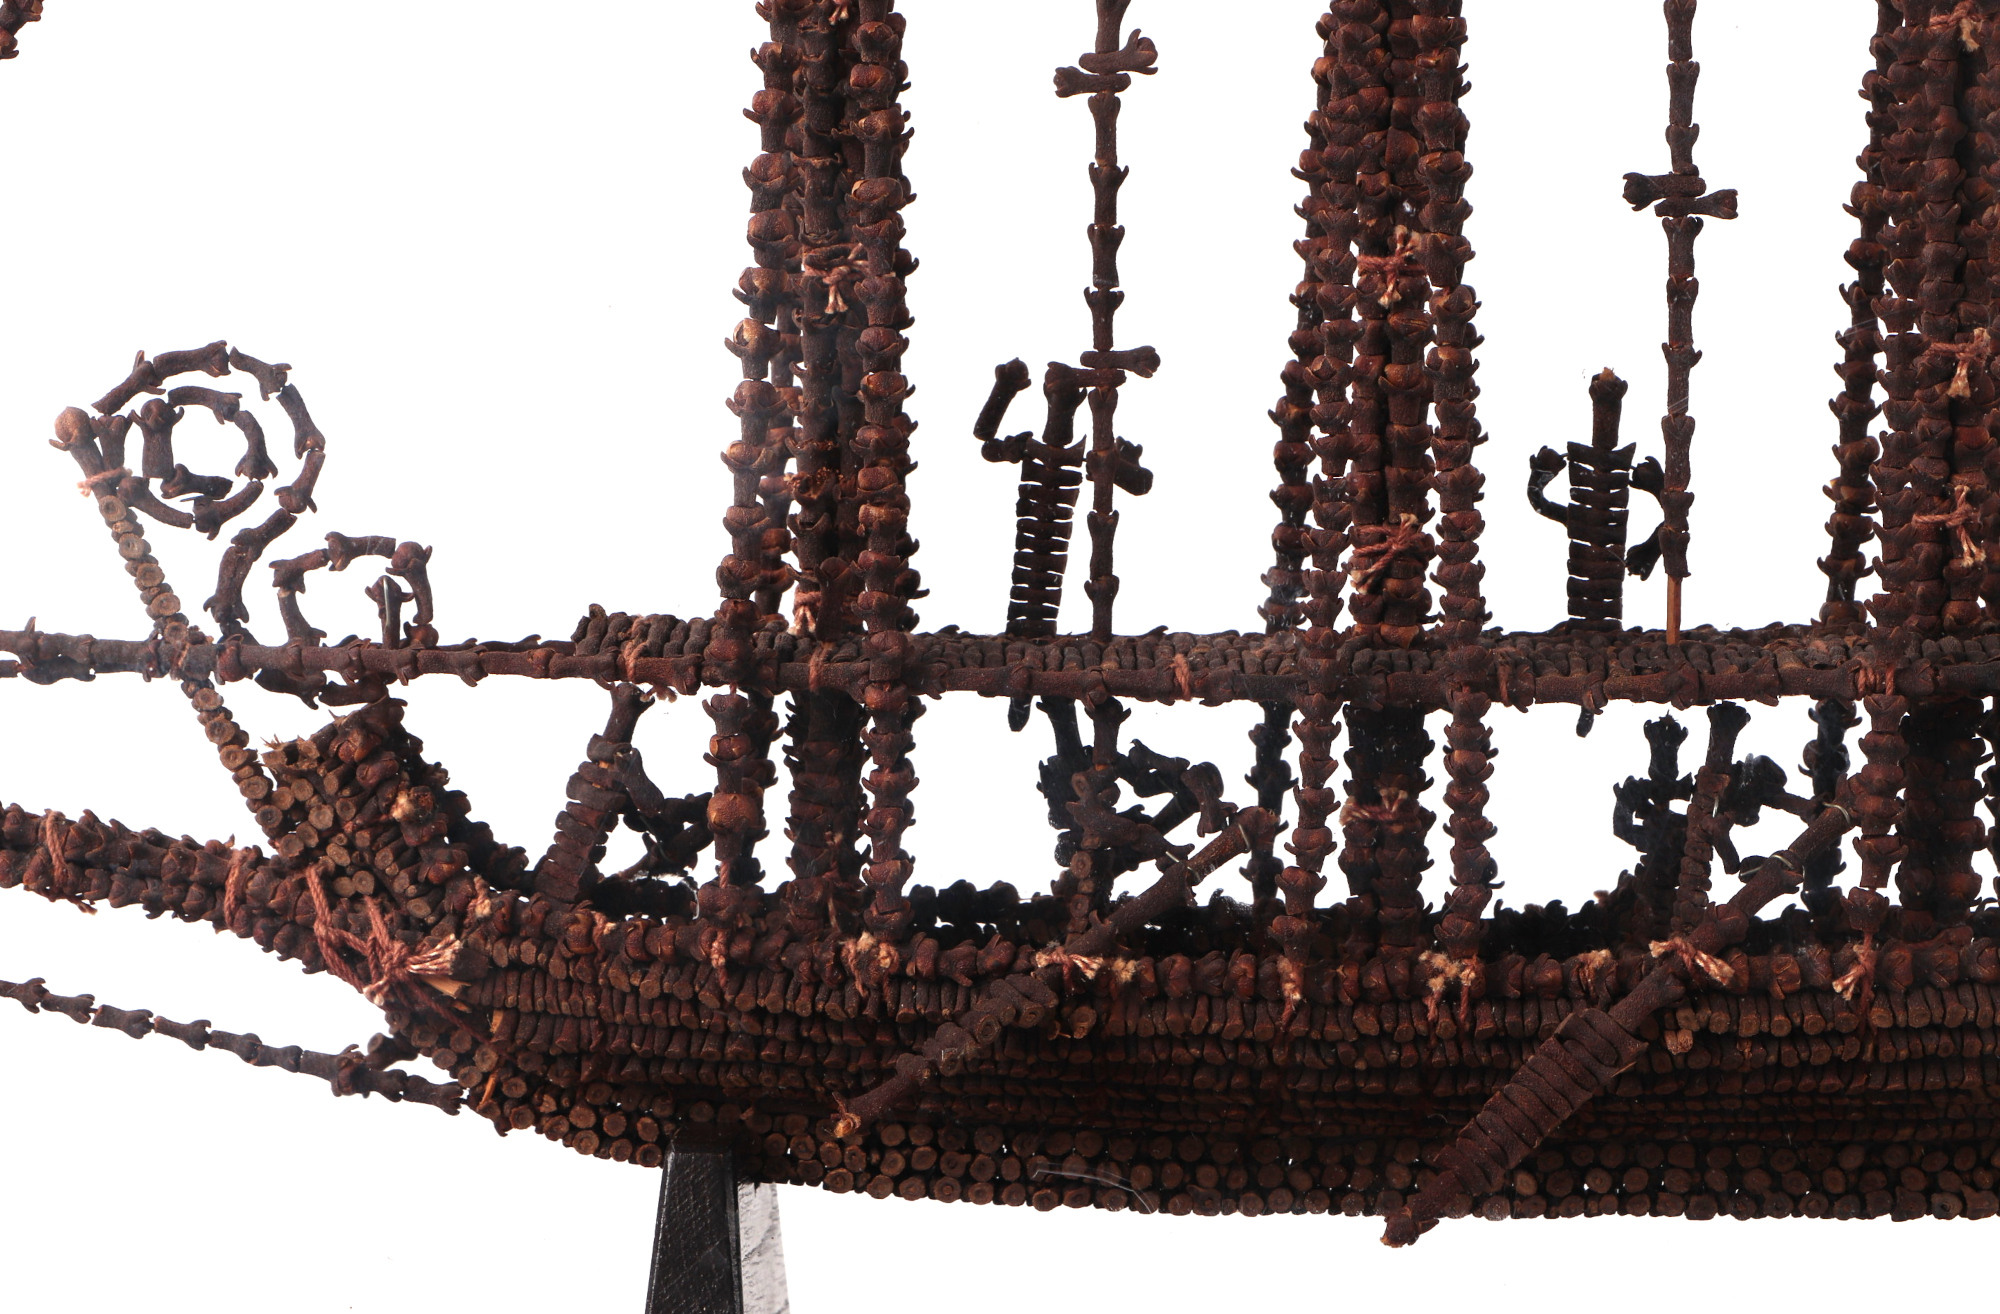 Spice Trade interest – a Moluccas Spice Islands model of a two-masted European sailing ship made - Image 4 of 4